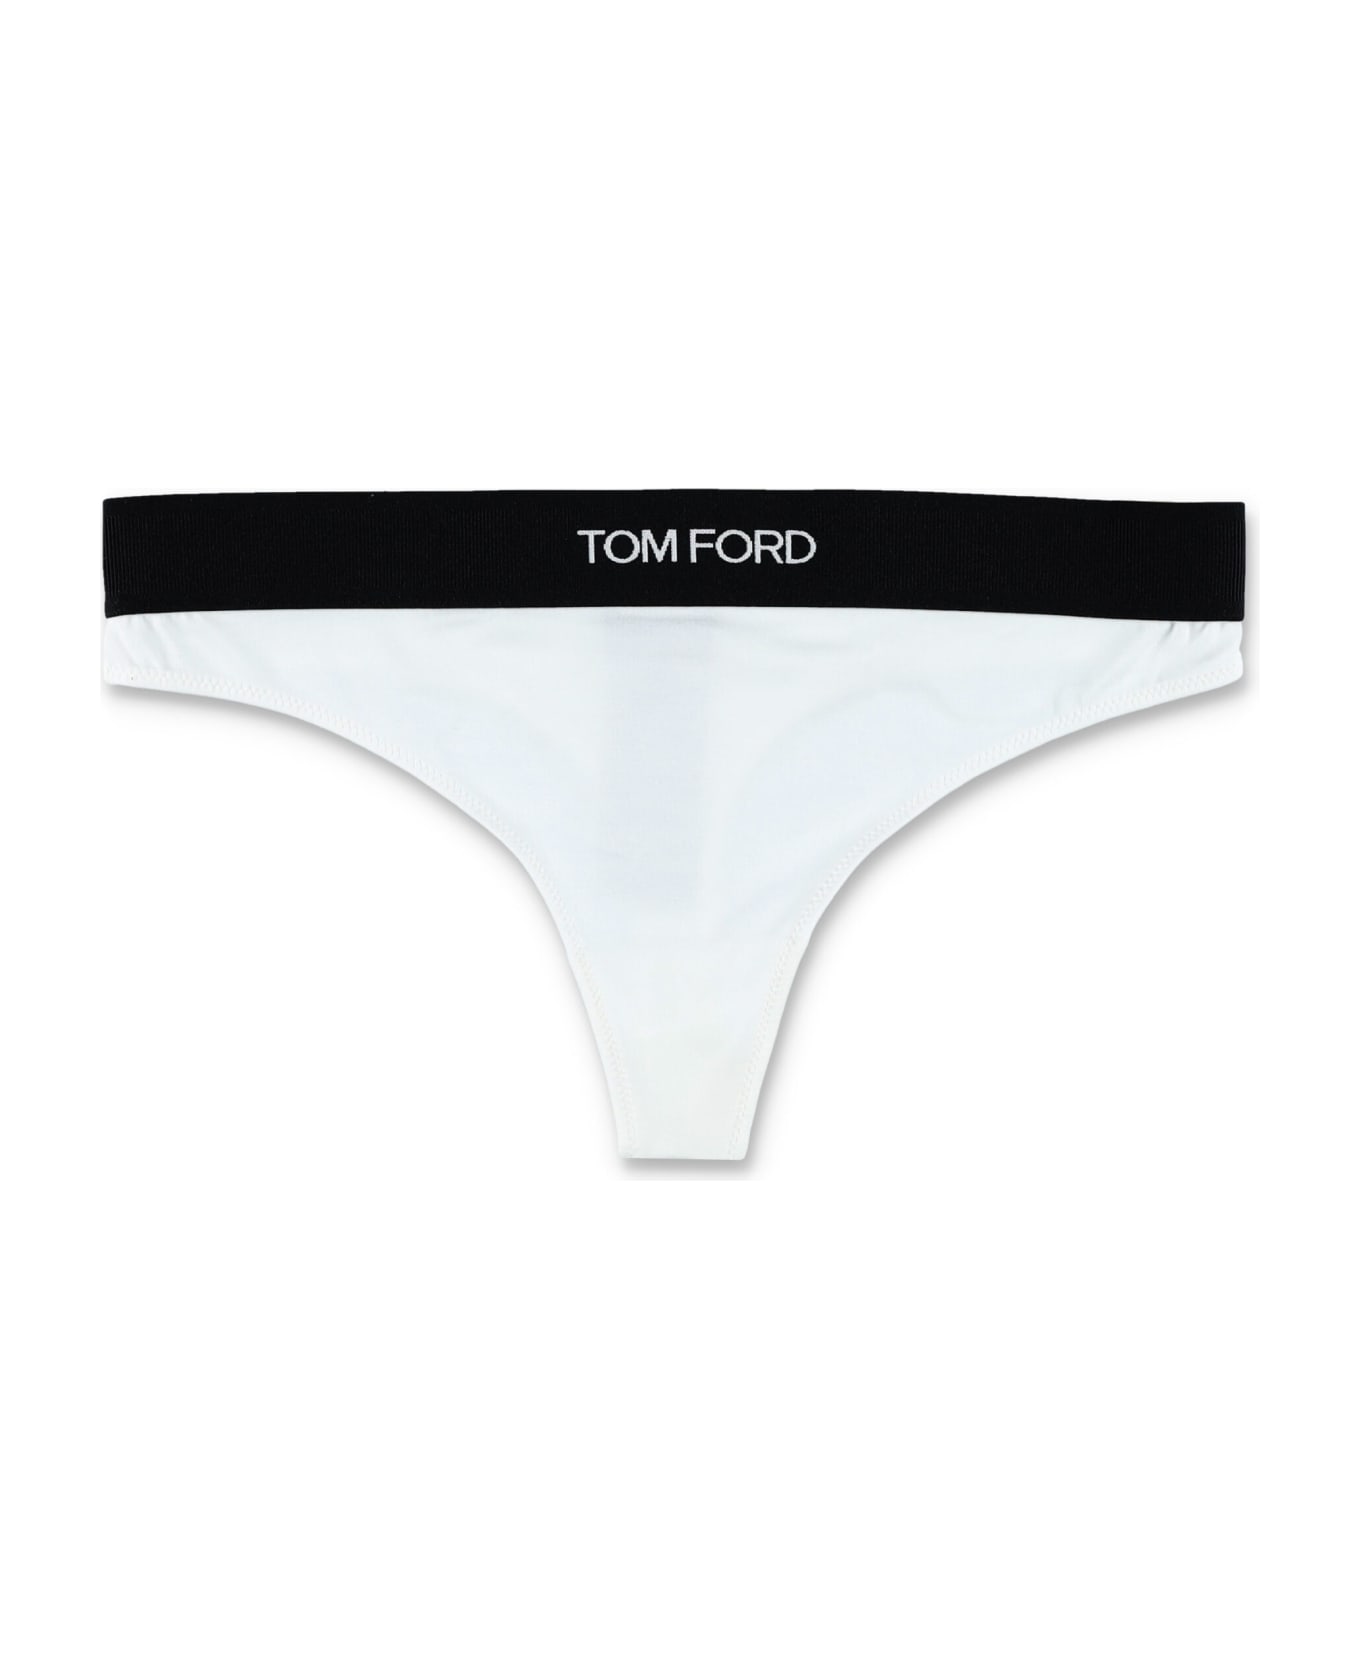 Tom Ford Brief With Logo - WHITE